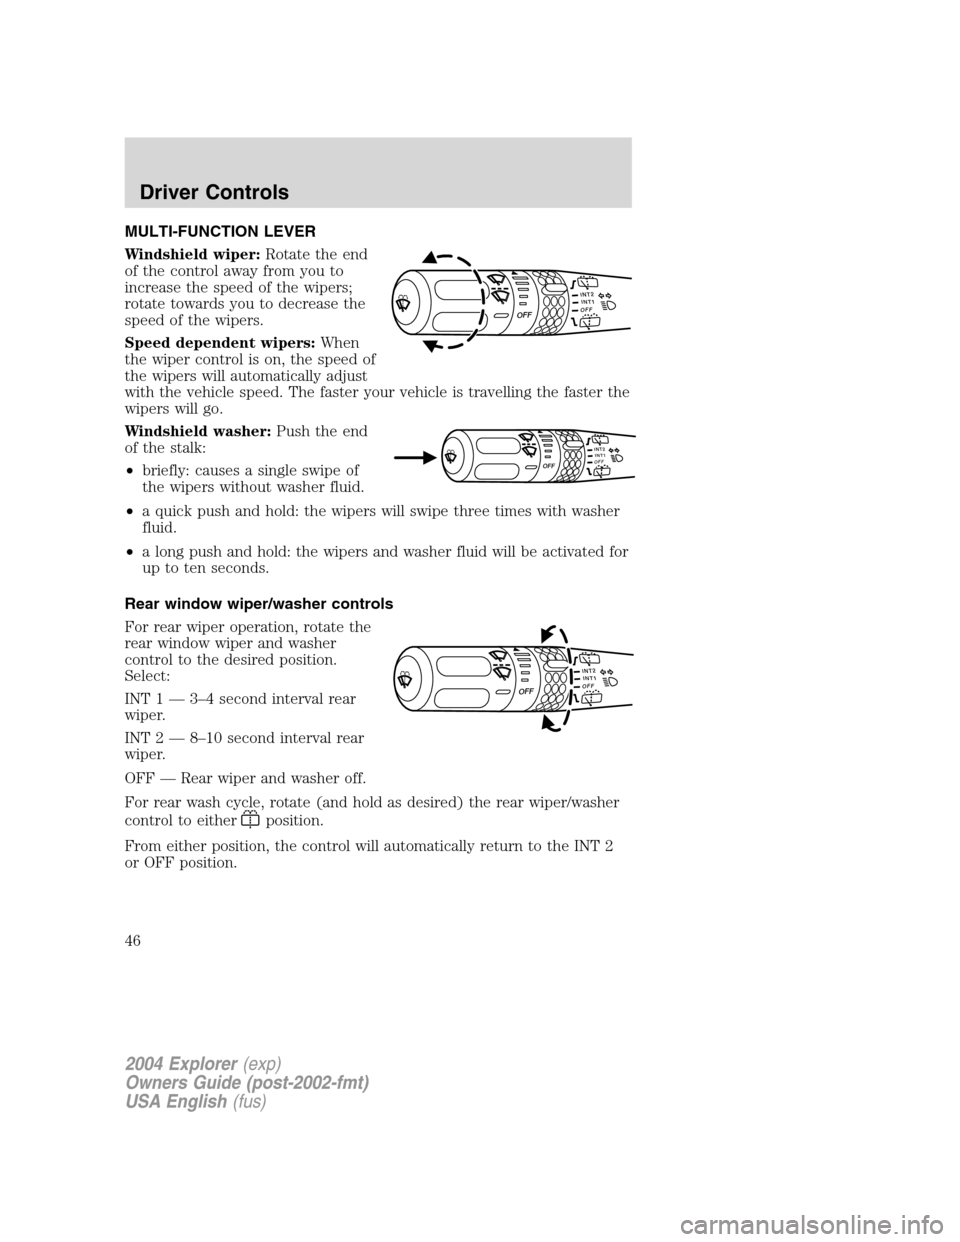 FORD EXPLORER 2004 3.G Service Manual MULTI-FUNCTION LEVER
Windshield wiper:Rotate the end
of the control away from you to
increase the speed of the wipers;
rotate towards you to decrease the
speed of the wipers.
Speed dependent wipers:Wh